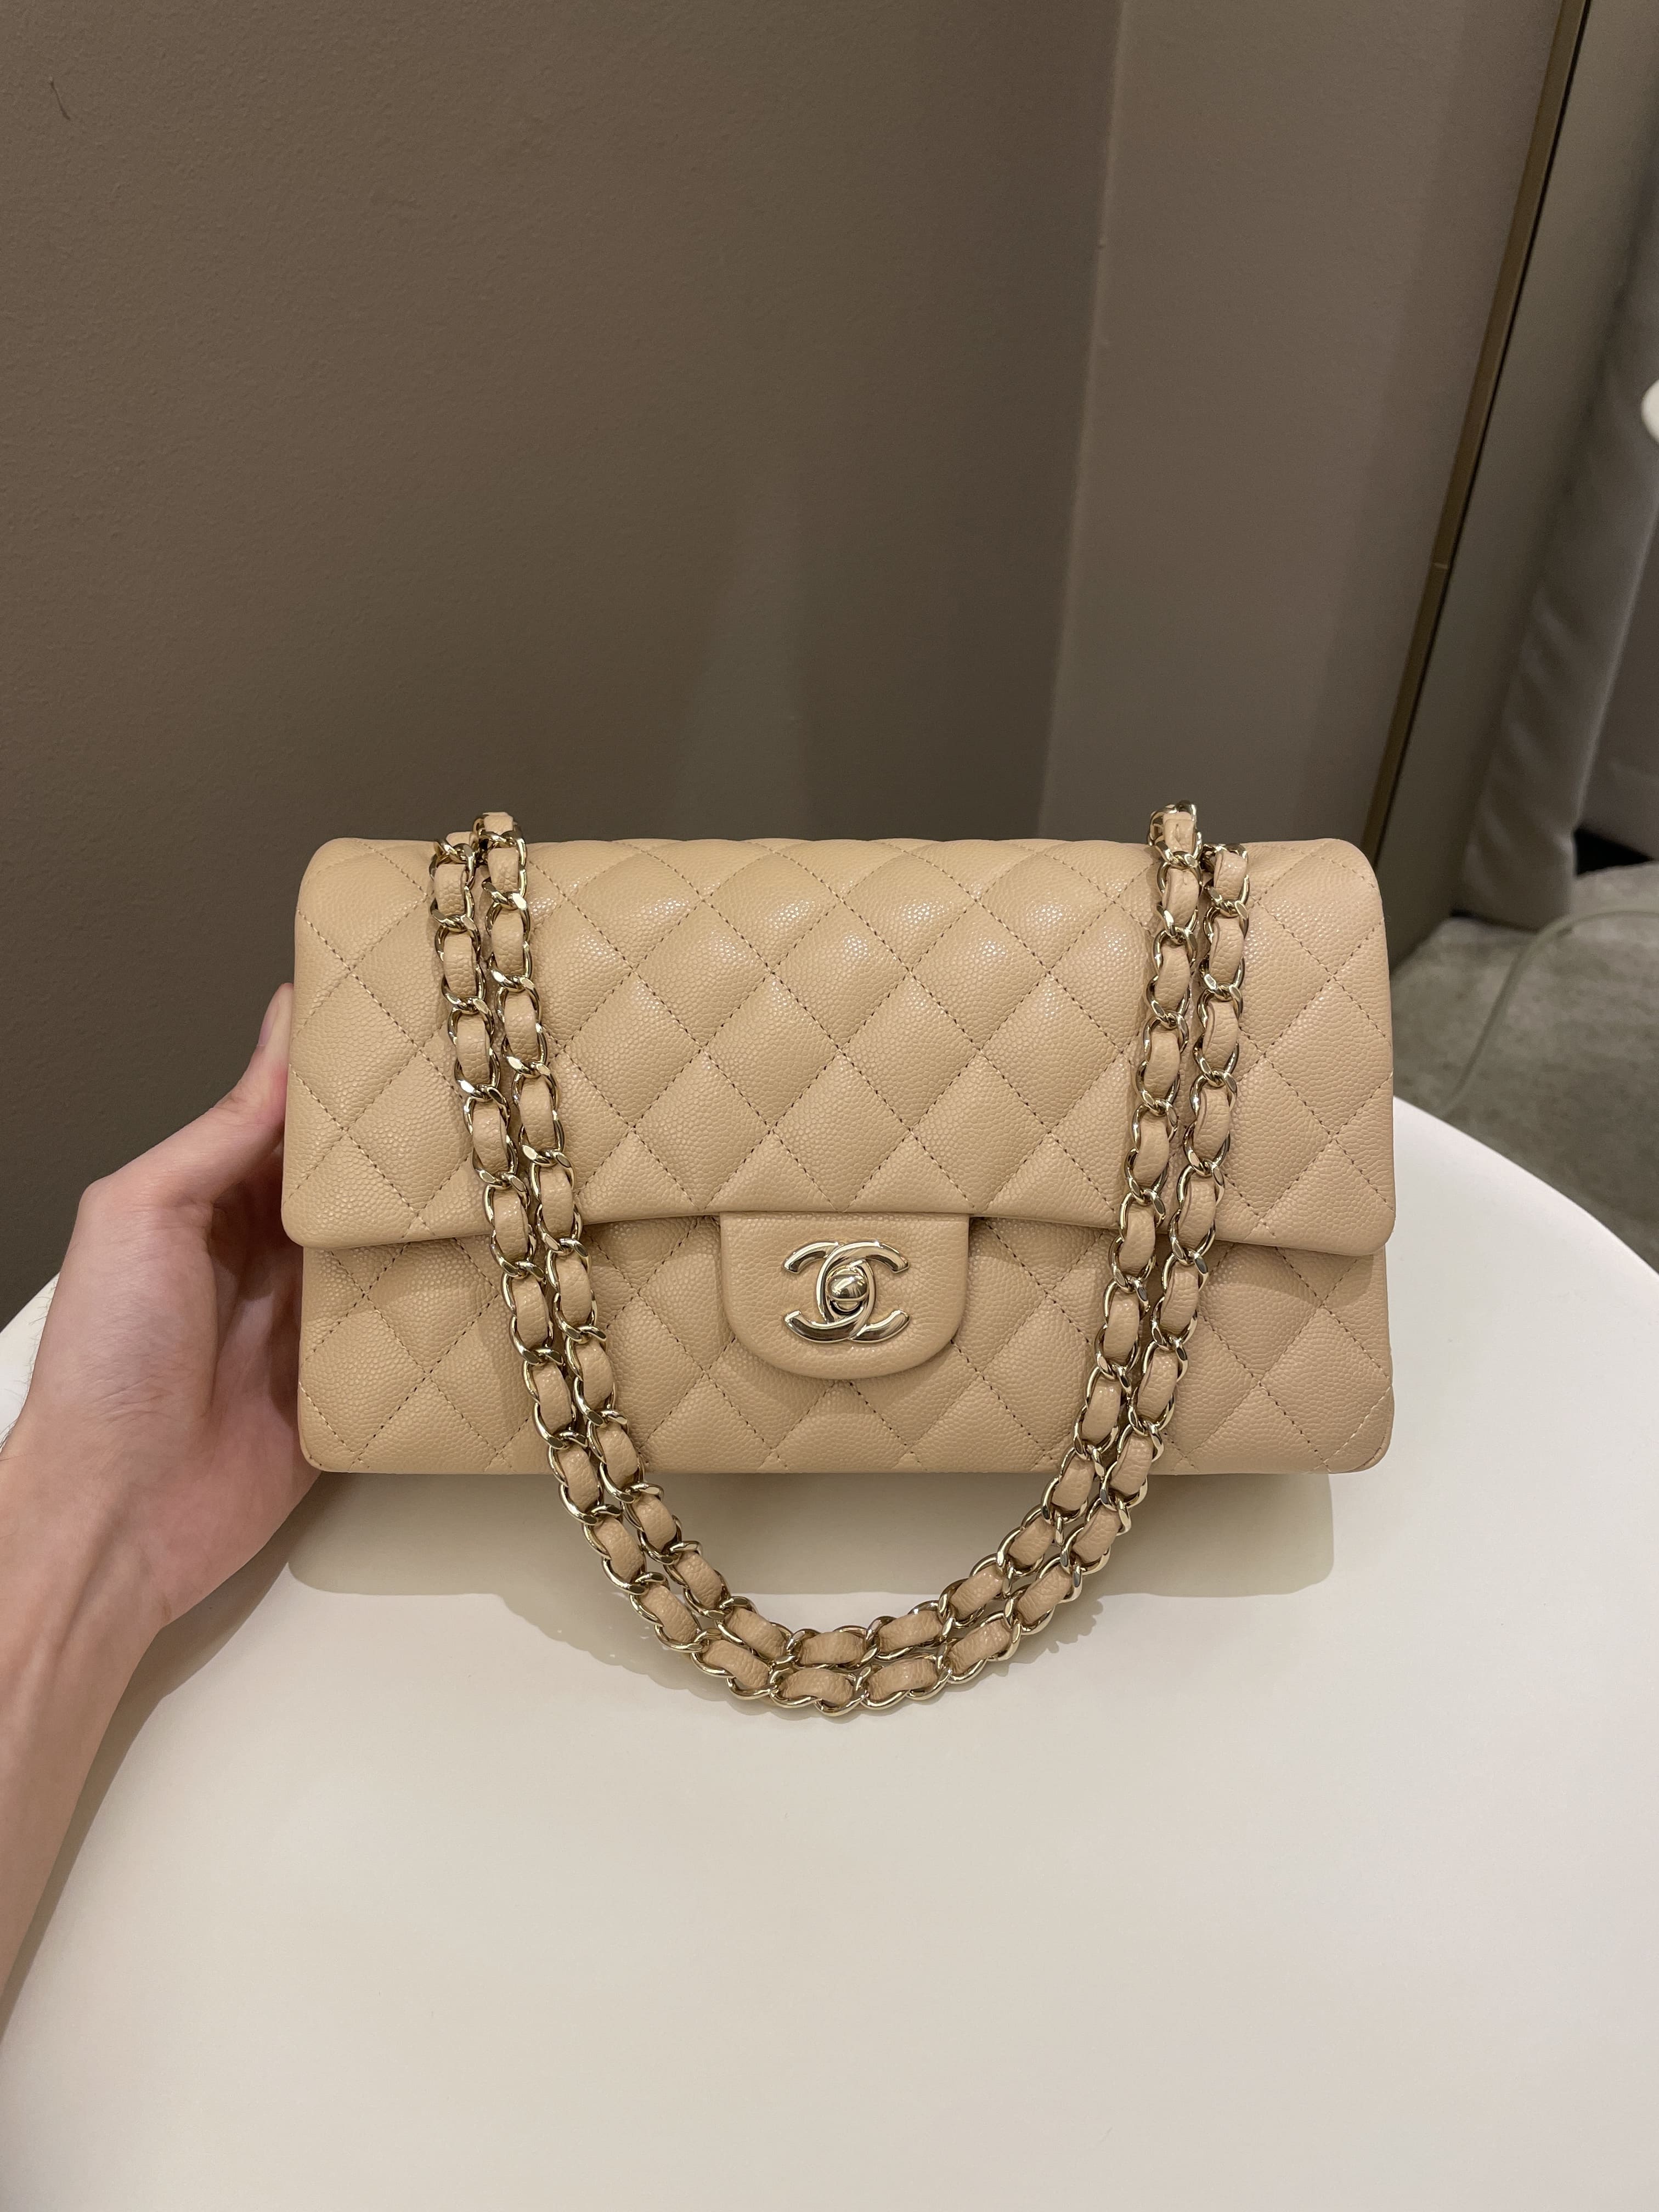 Chanel Caviar Double Flap Bag in Beige Clair